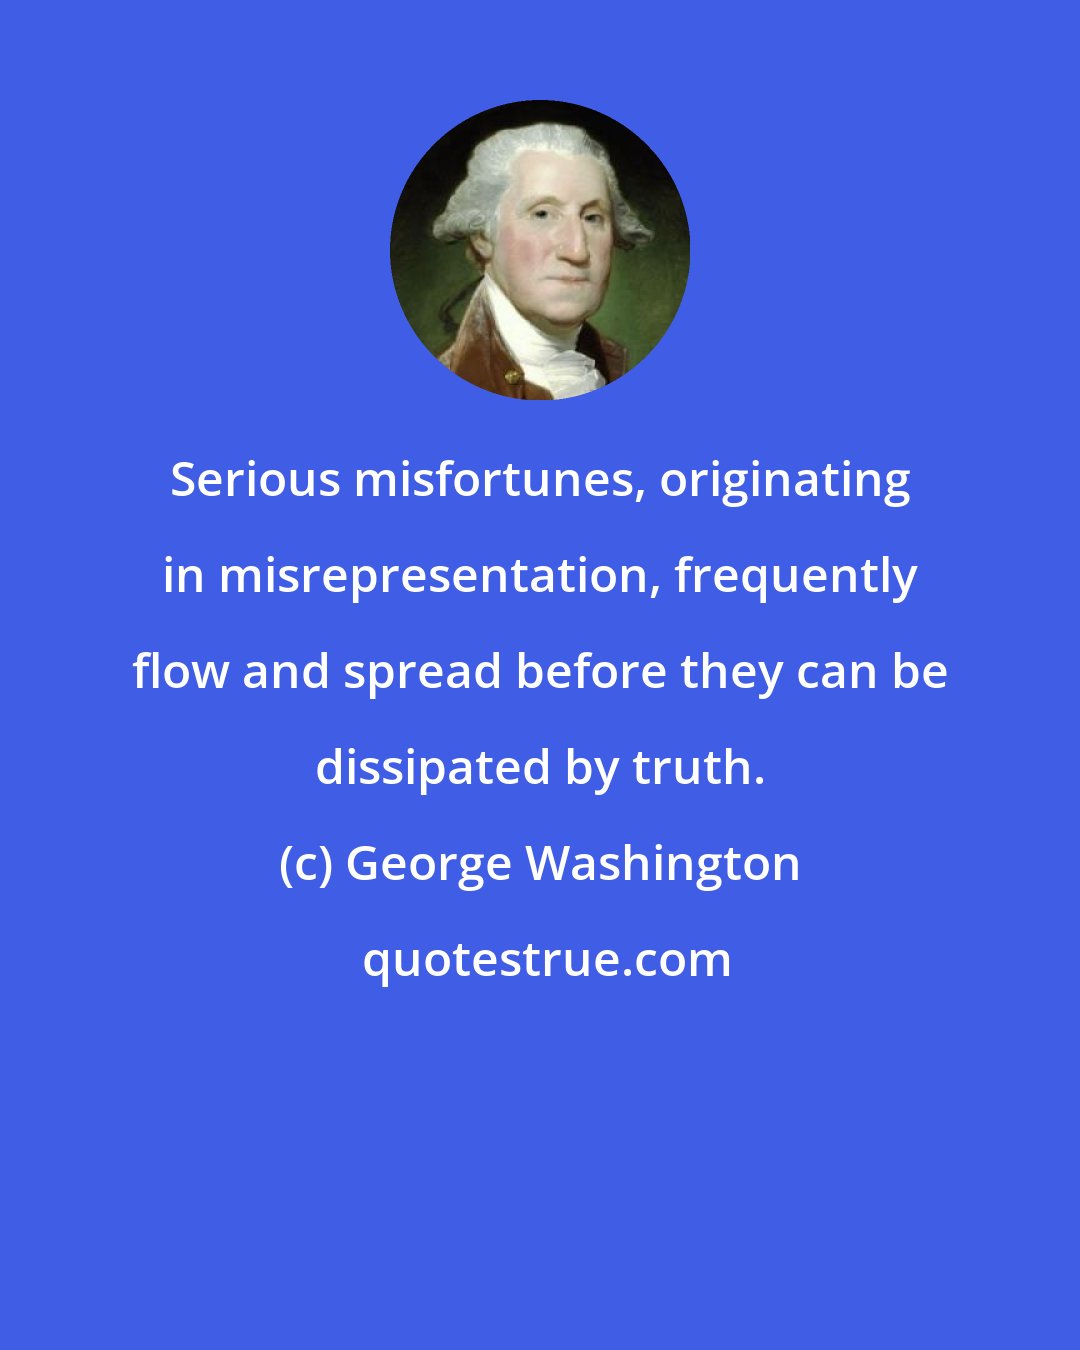 George Washington: Serious misfortunes, originating in misrepresentation, frequently flow and spread before they can be dissipated by truth.